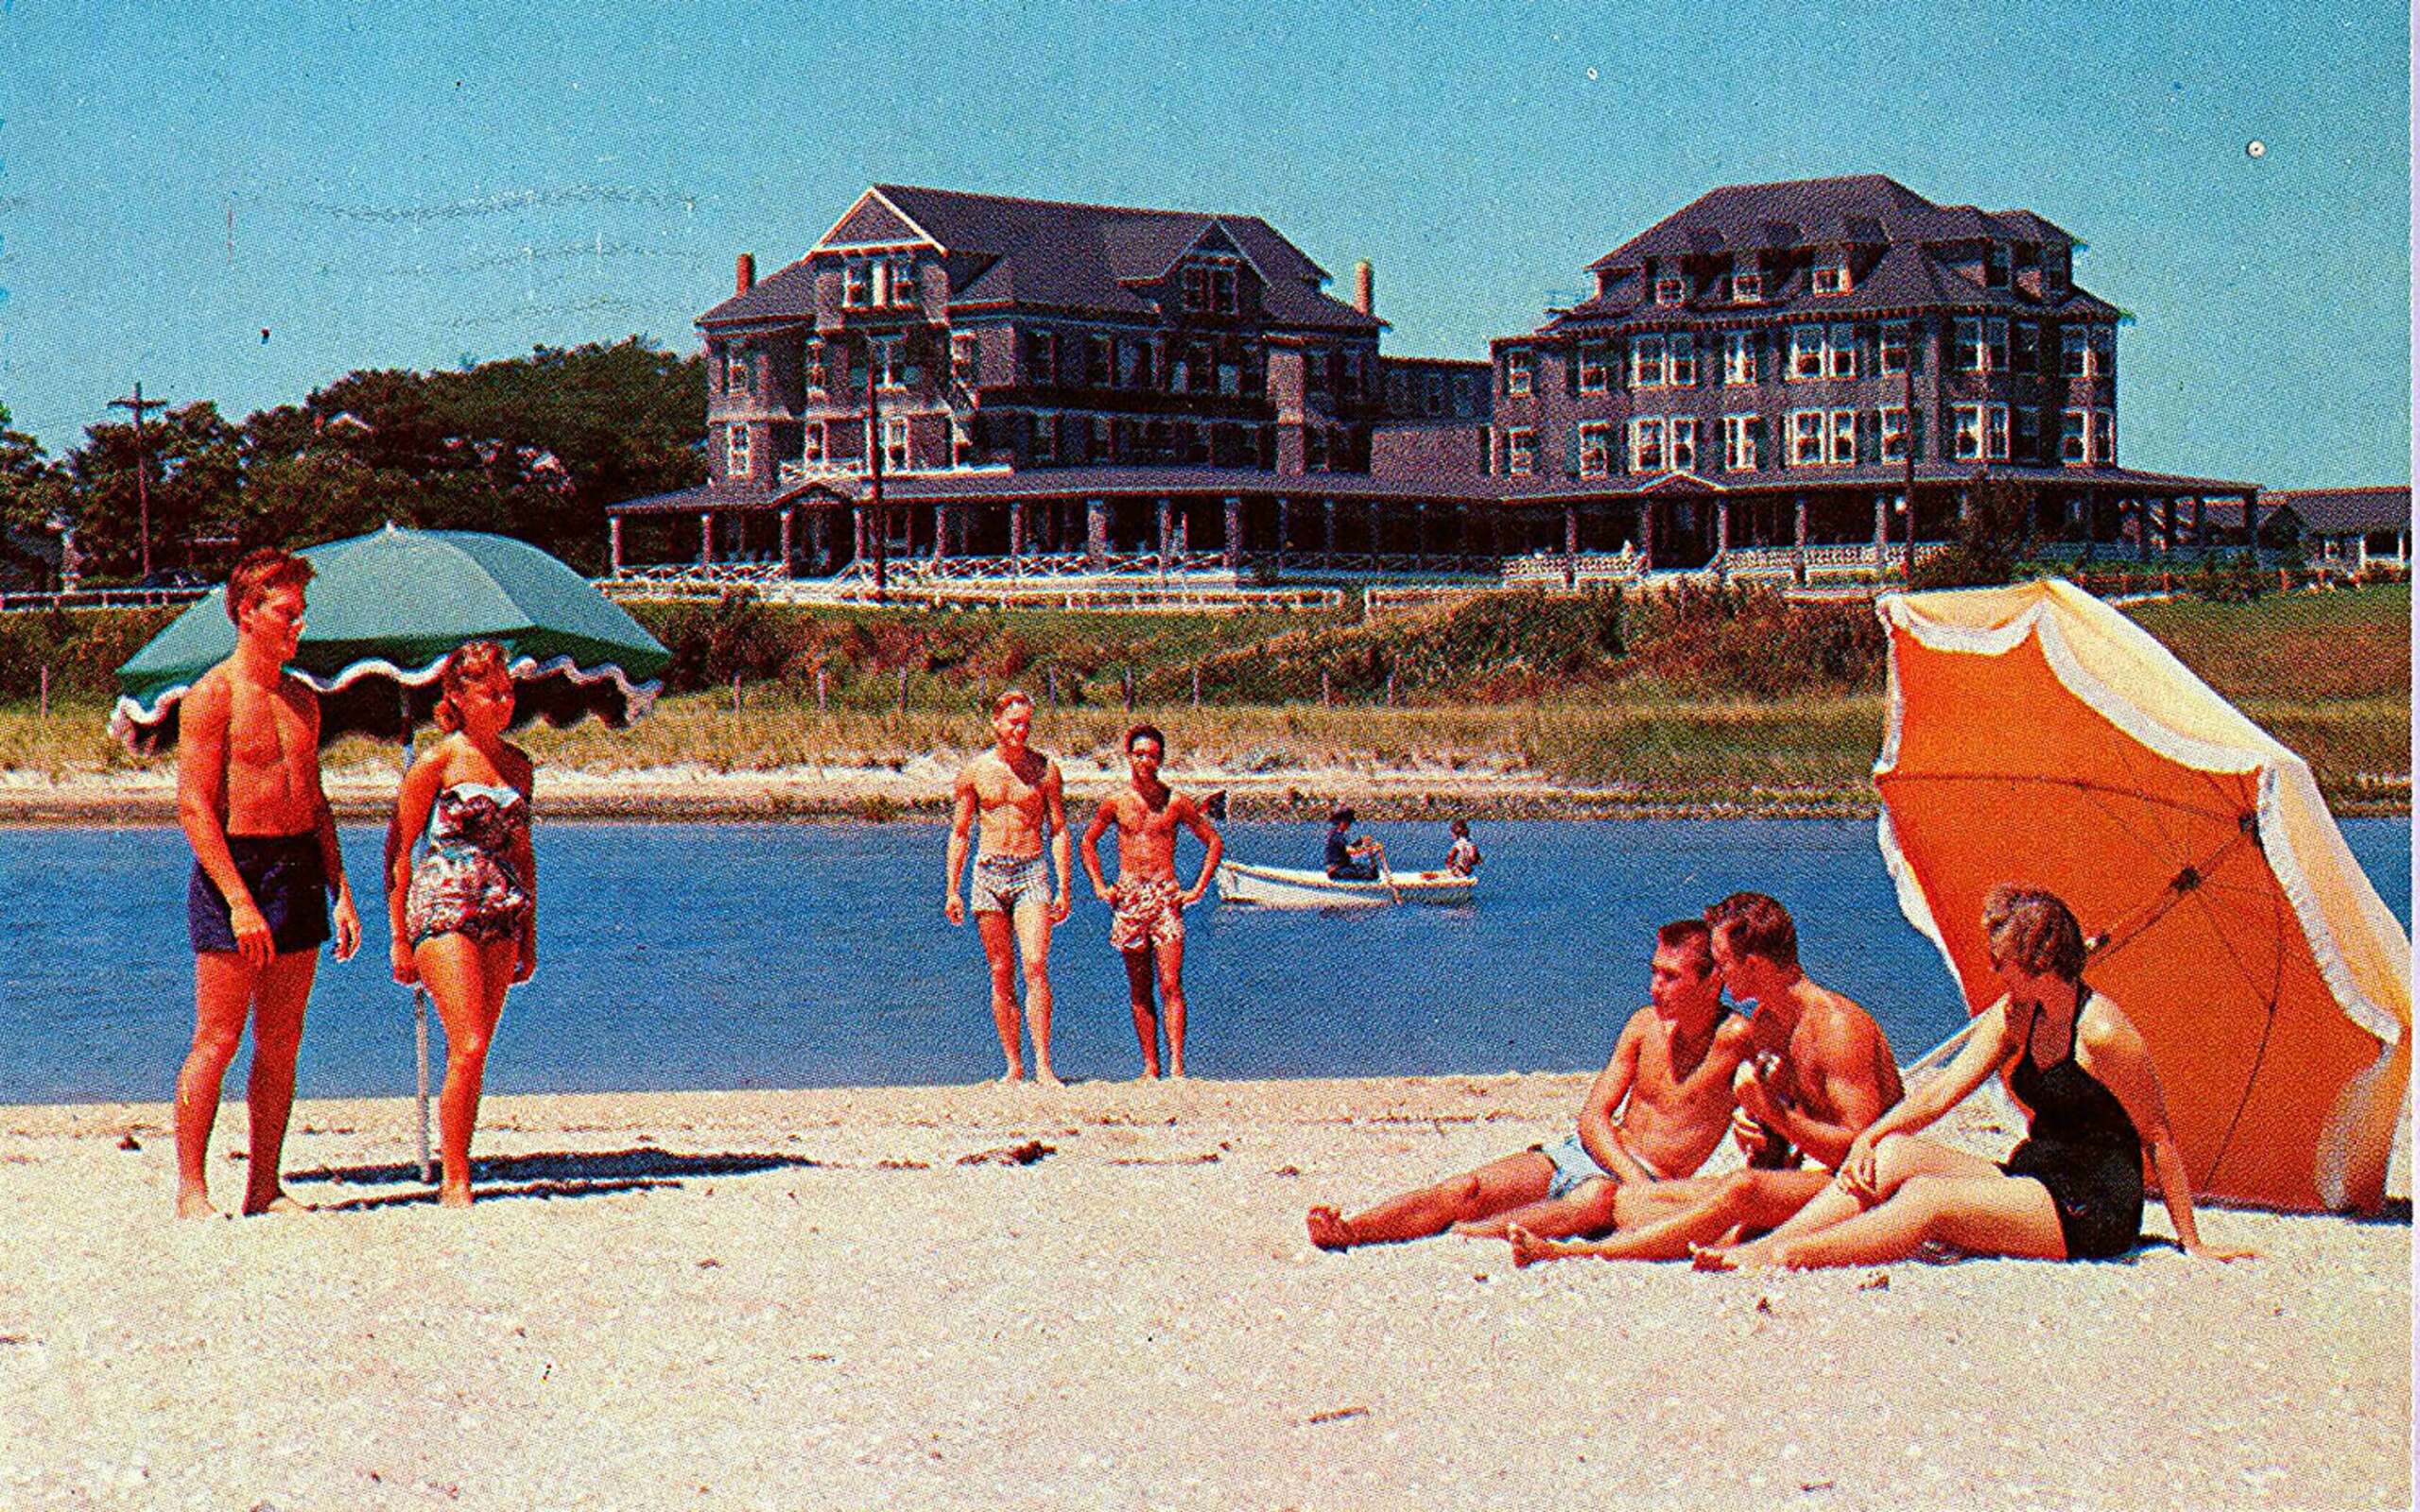 vintage photo of people on a beach